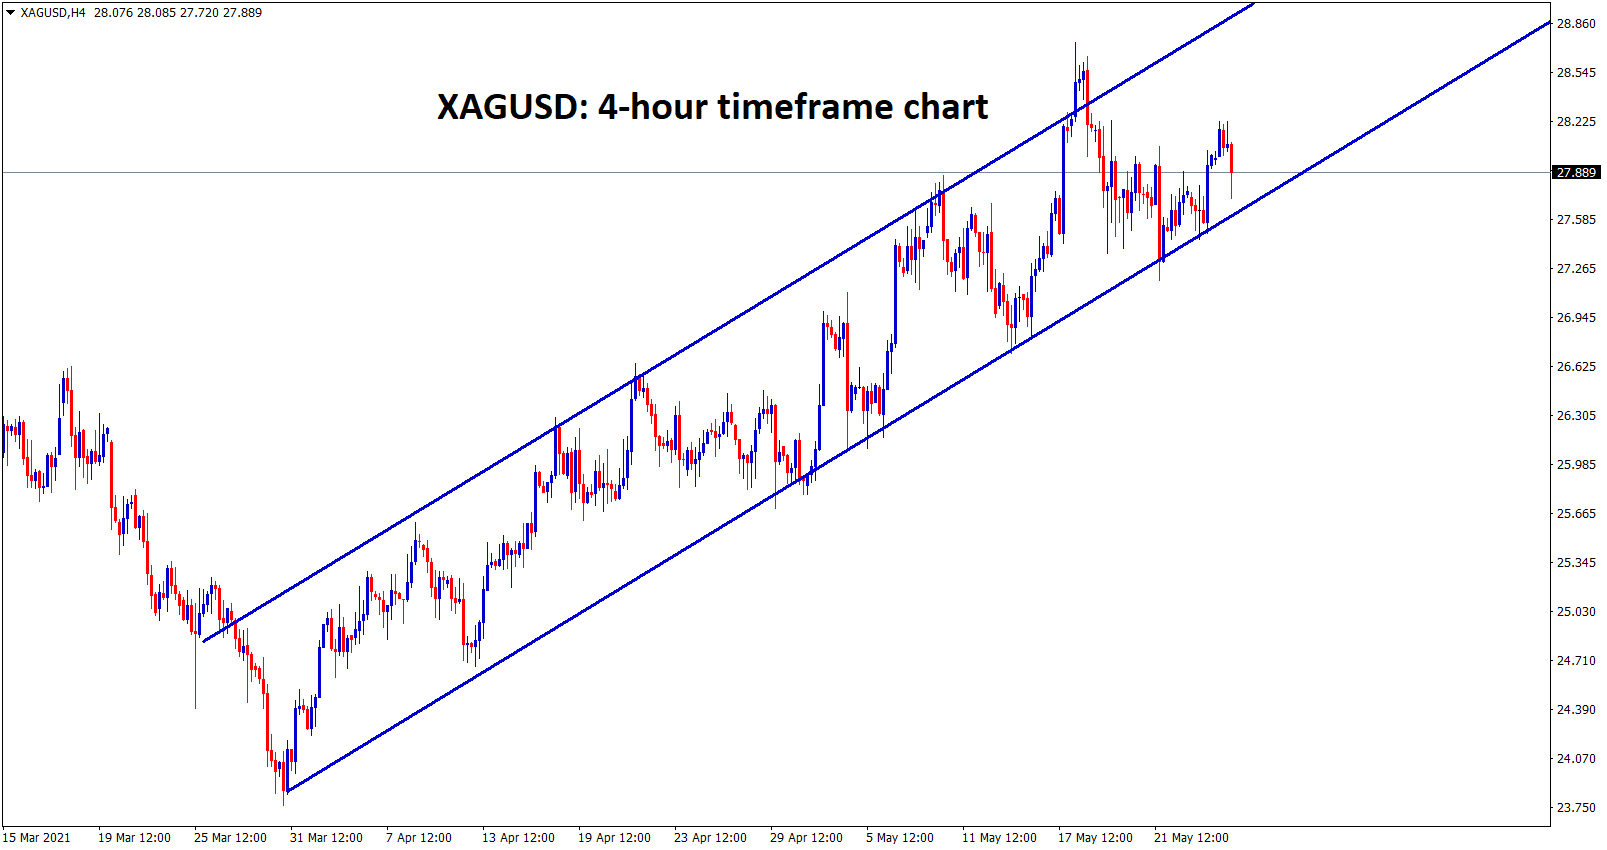 XAGUSD silver is moving in an Ascending channel continuosly for long time